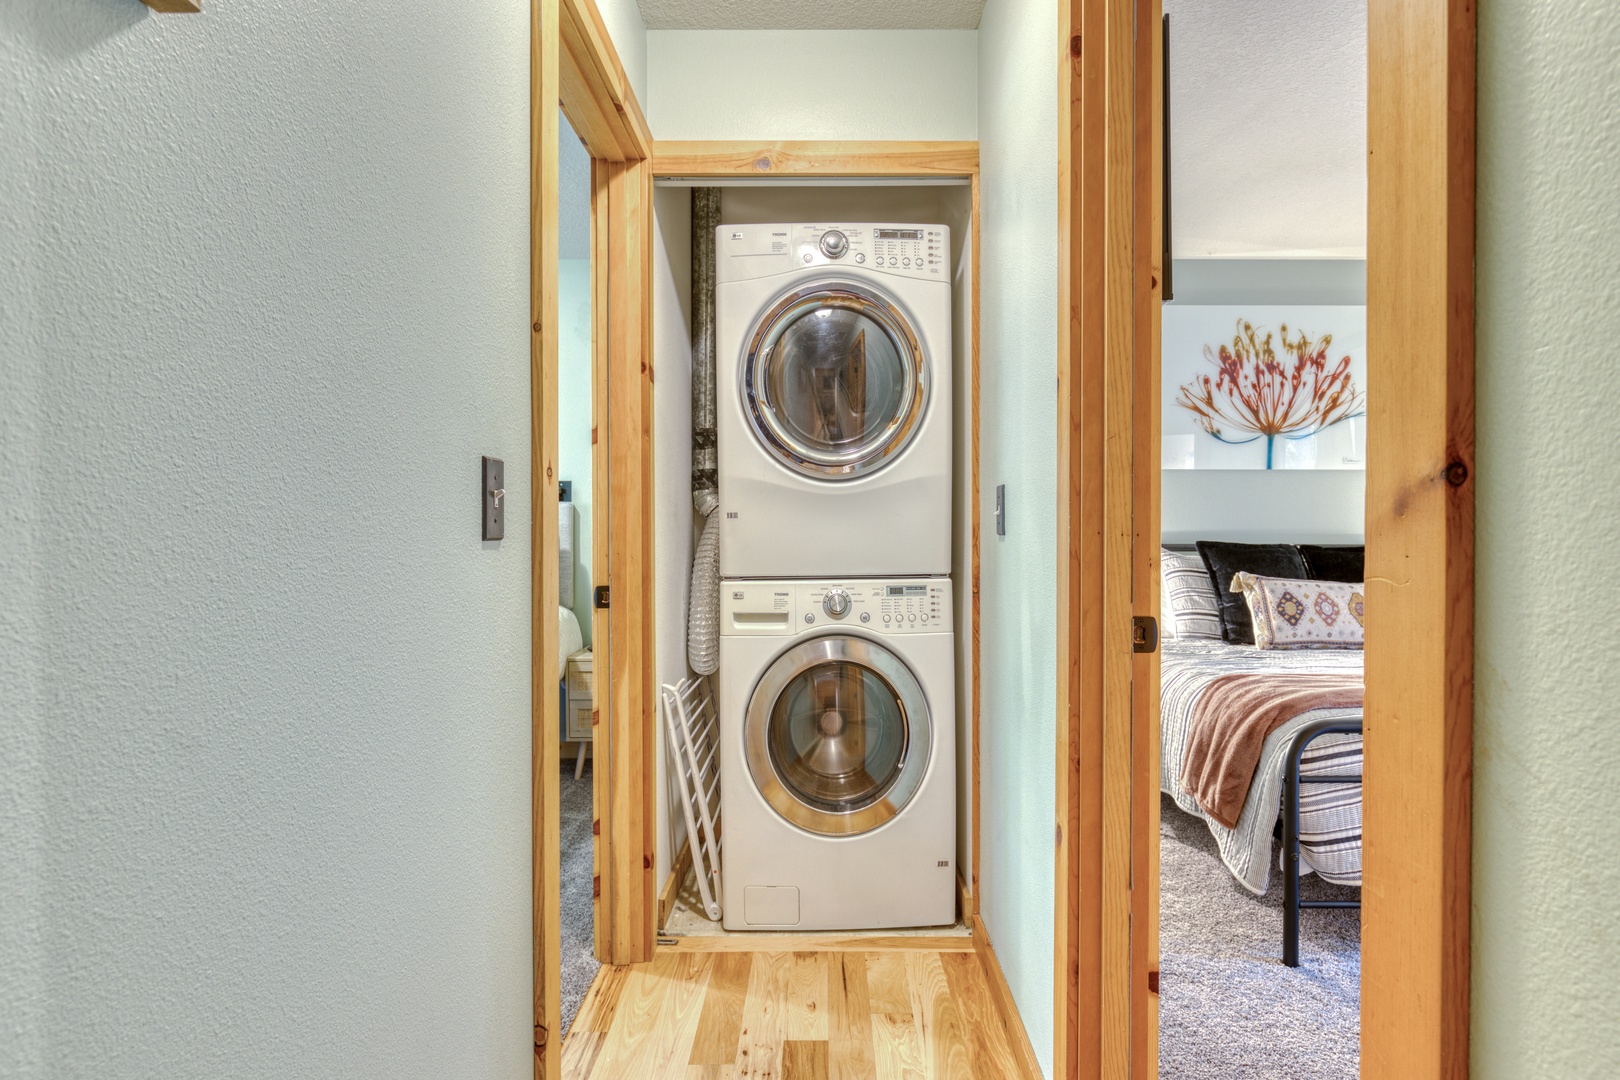 Brightwood Vacation Rentals, Riverside Retreat - Equipped with a full size washer and dryer just down the hall from the common areas